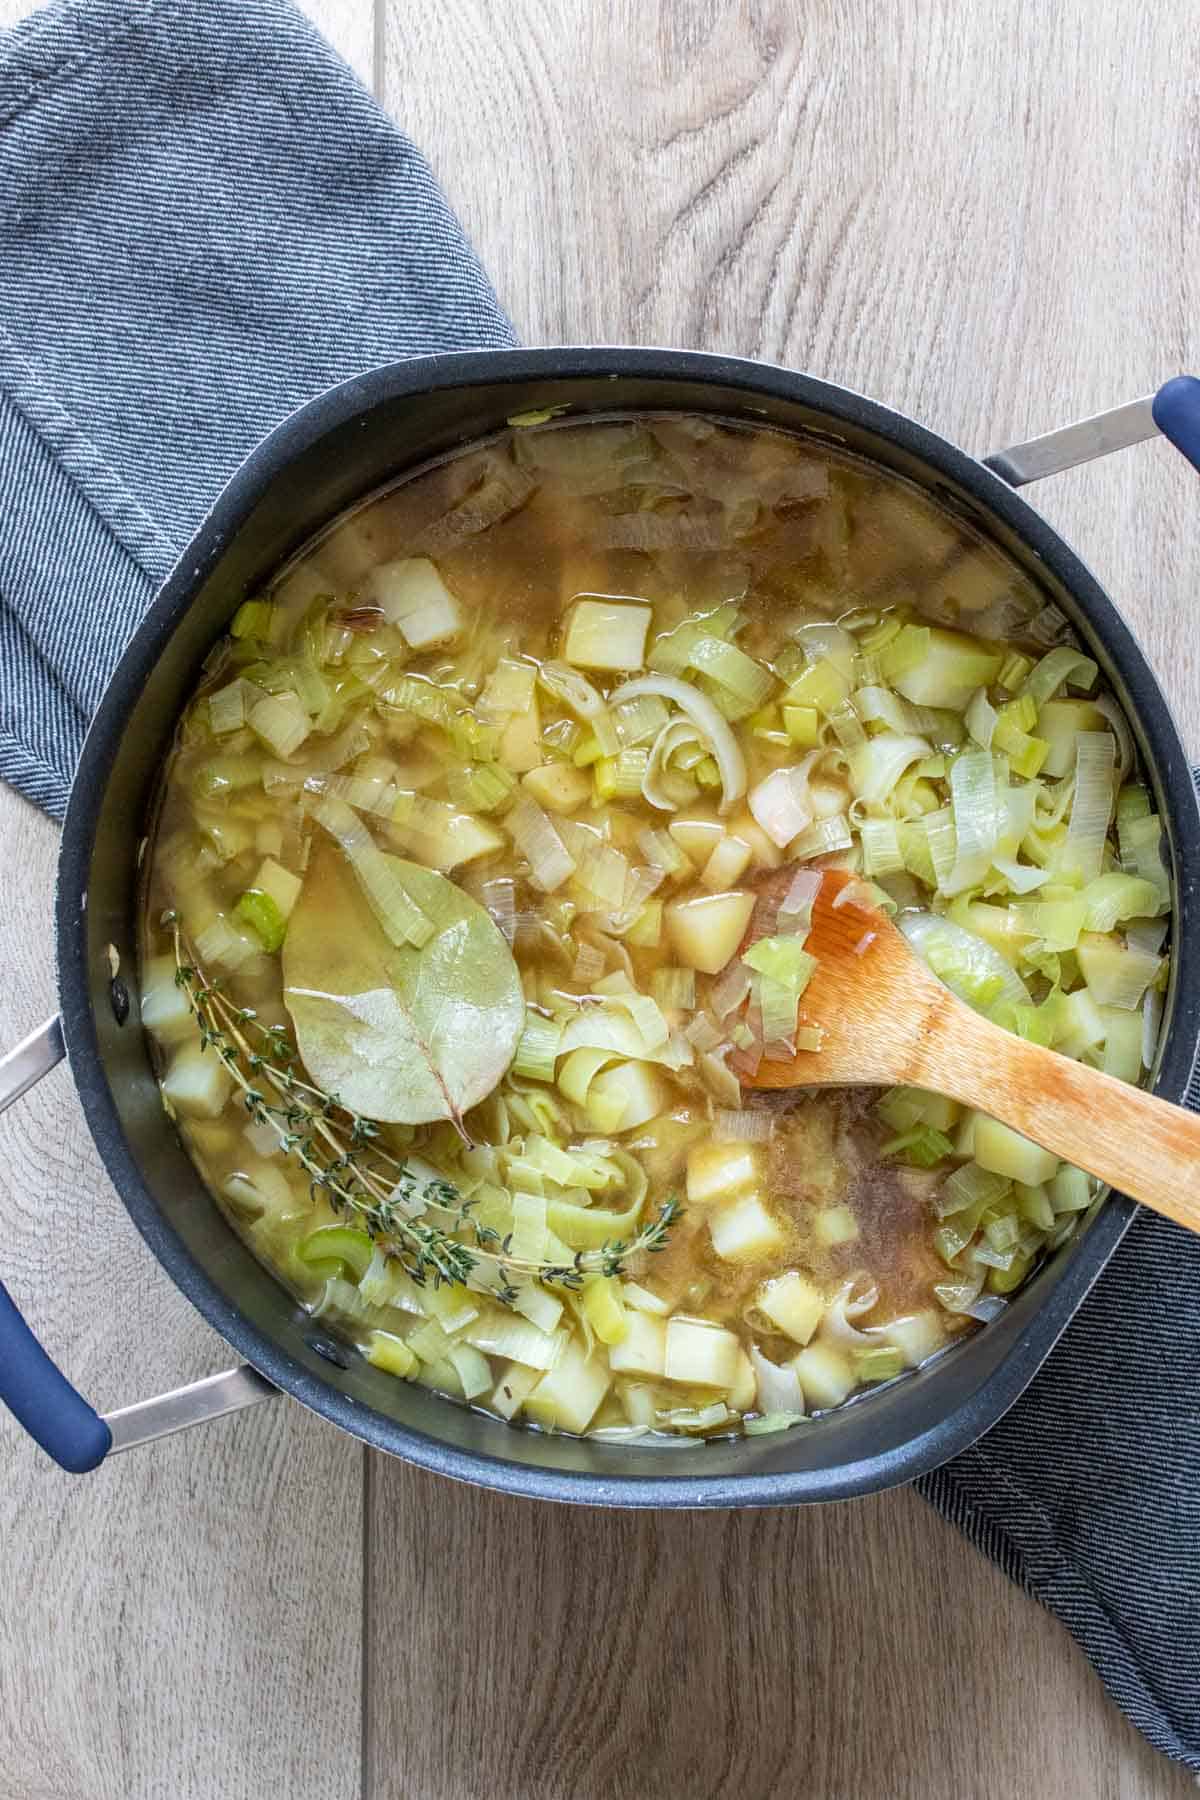 Wooden spoon mixing a broth with potatoes, leeks and herbs in a black pot